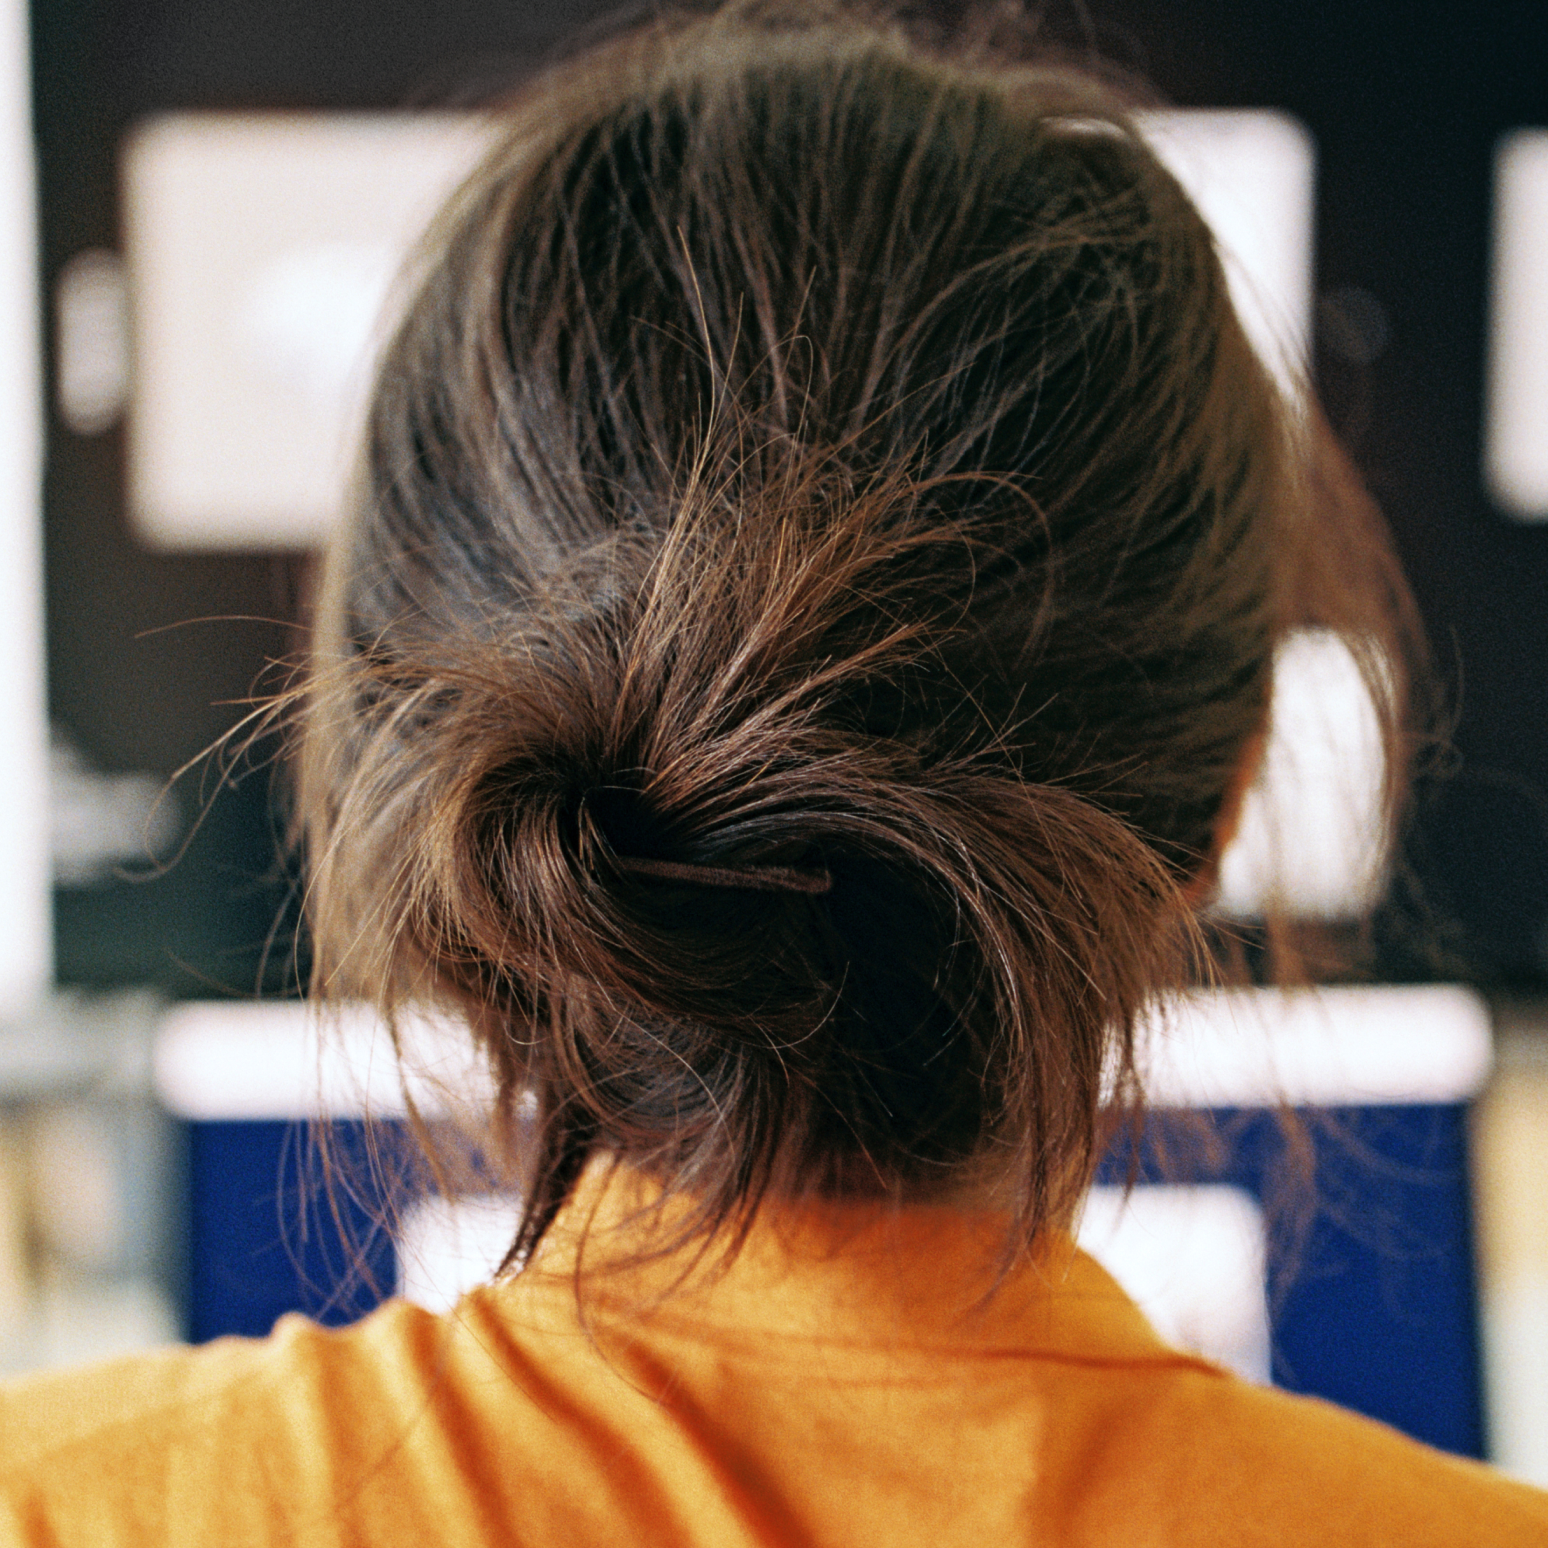 Close-up of a woman's hair seen from behind